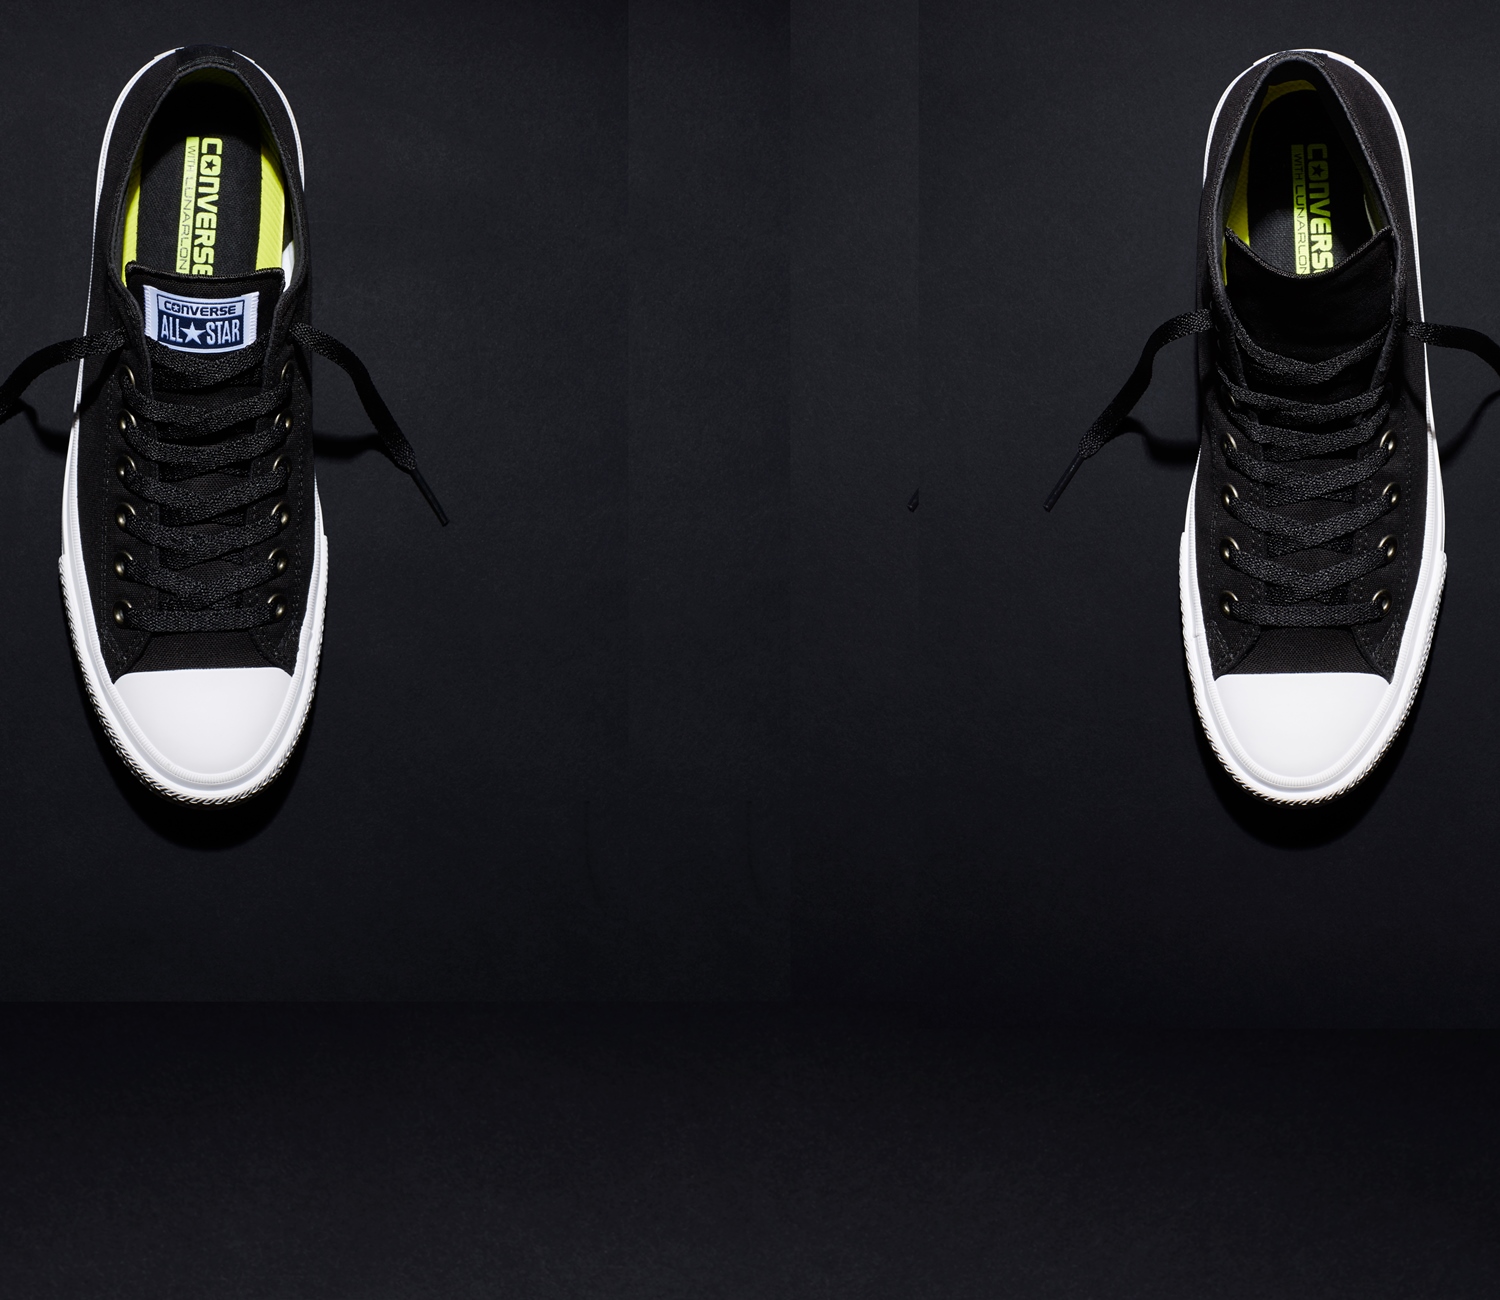 converse jack purcell 2014